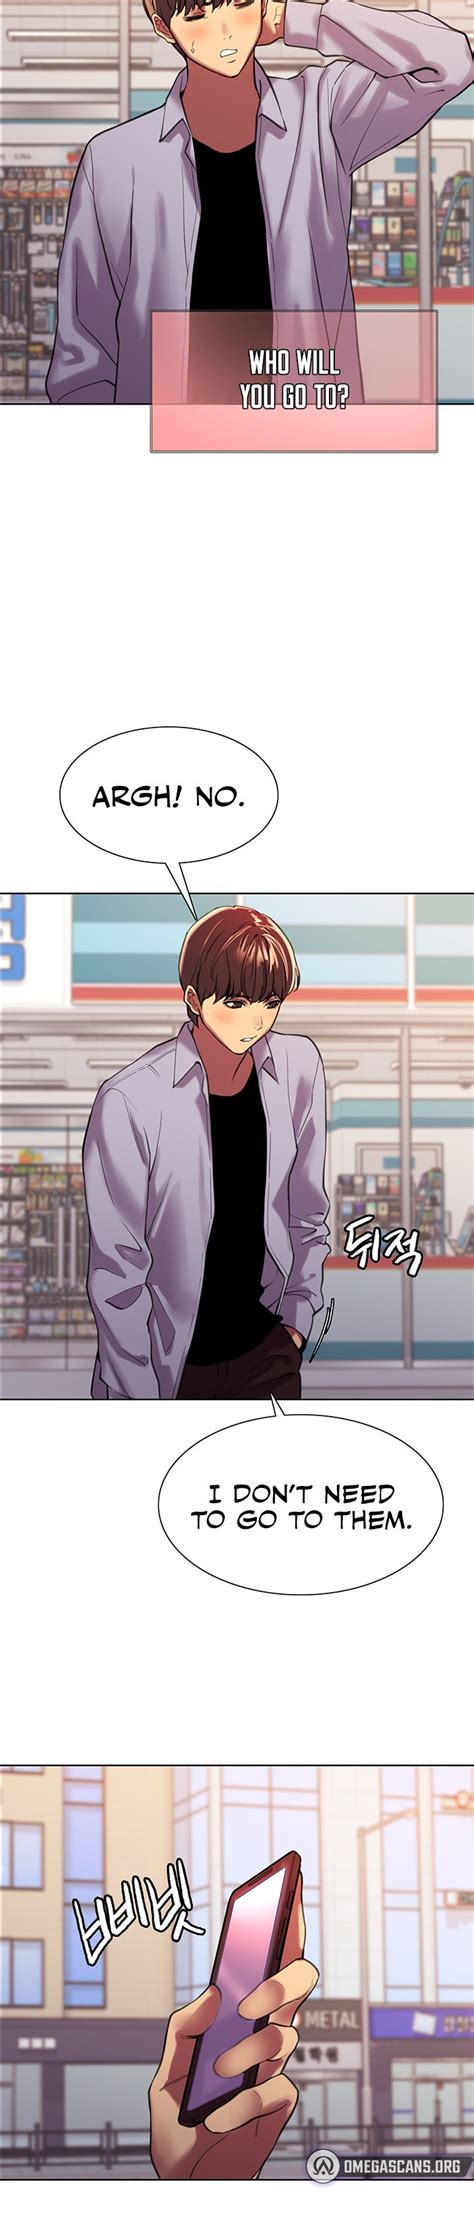 Sex stopwatch manhwa chapter 63  Did you just secretly look at my chest and panties?”